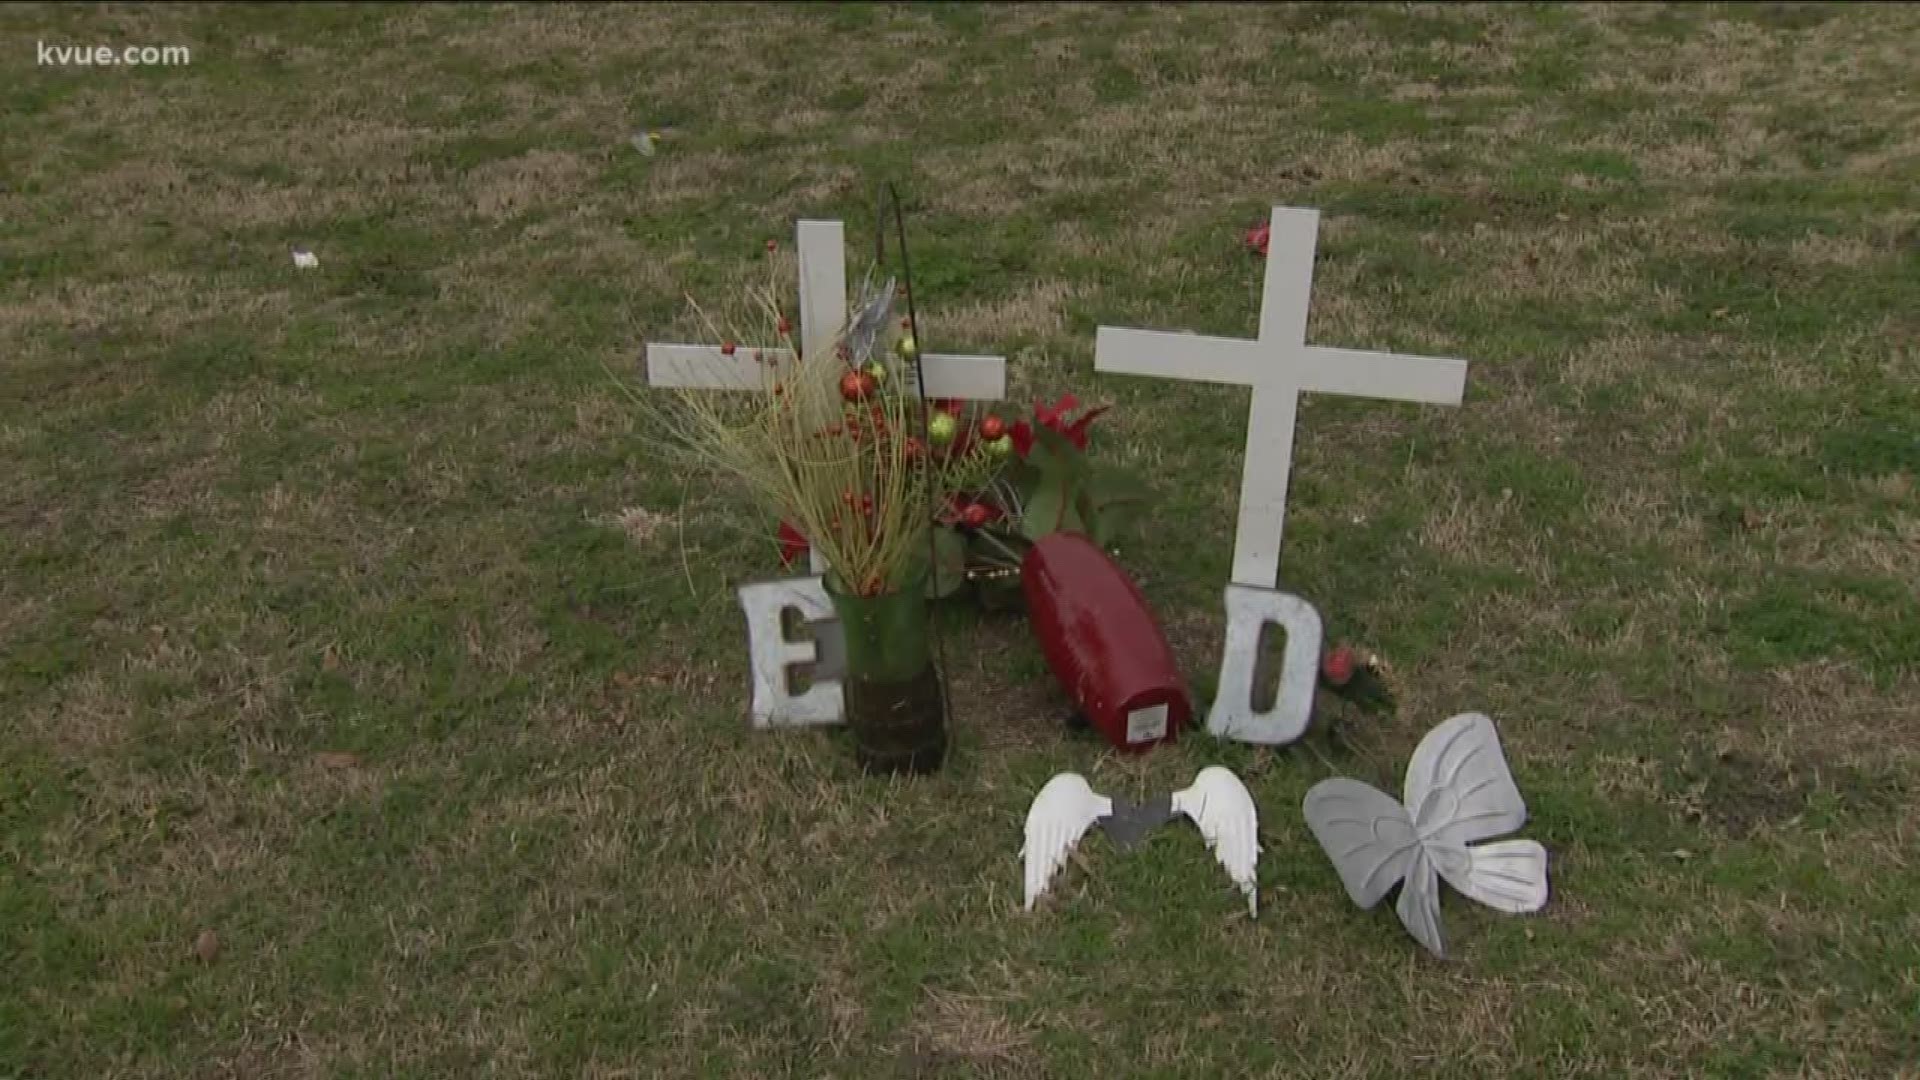 Two doves were released to honor the memory of two boys who were killed in a crash a year ago in Cedar Park. Kris Betts explains why the family is frustrated as they deal with their grief.